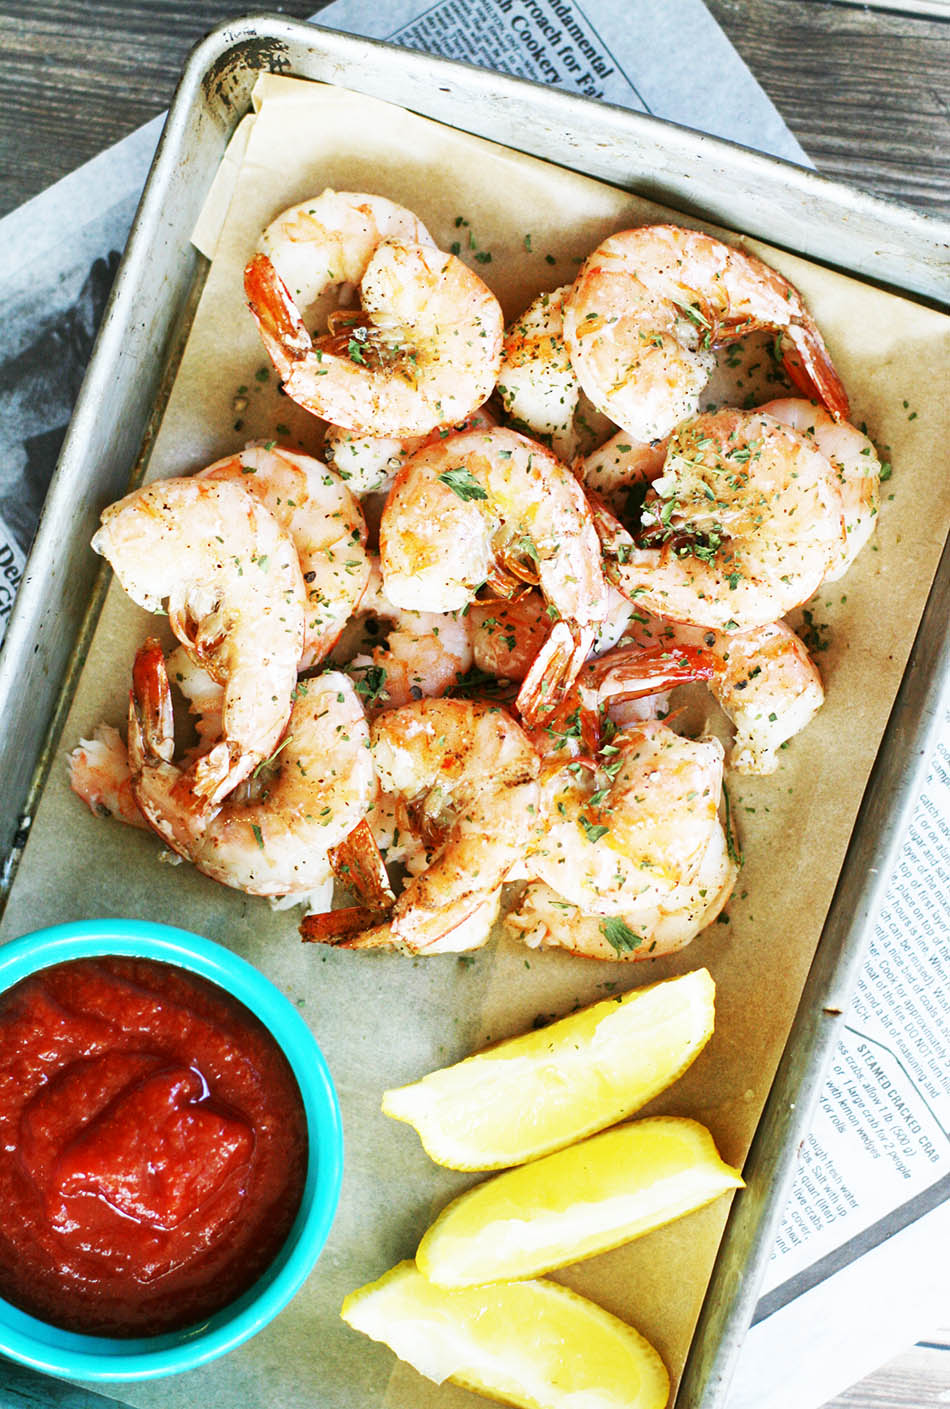 How to make foolproof oven-broiled shrimp at home: Click through for recipe.